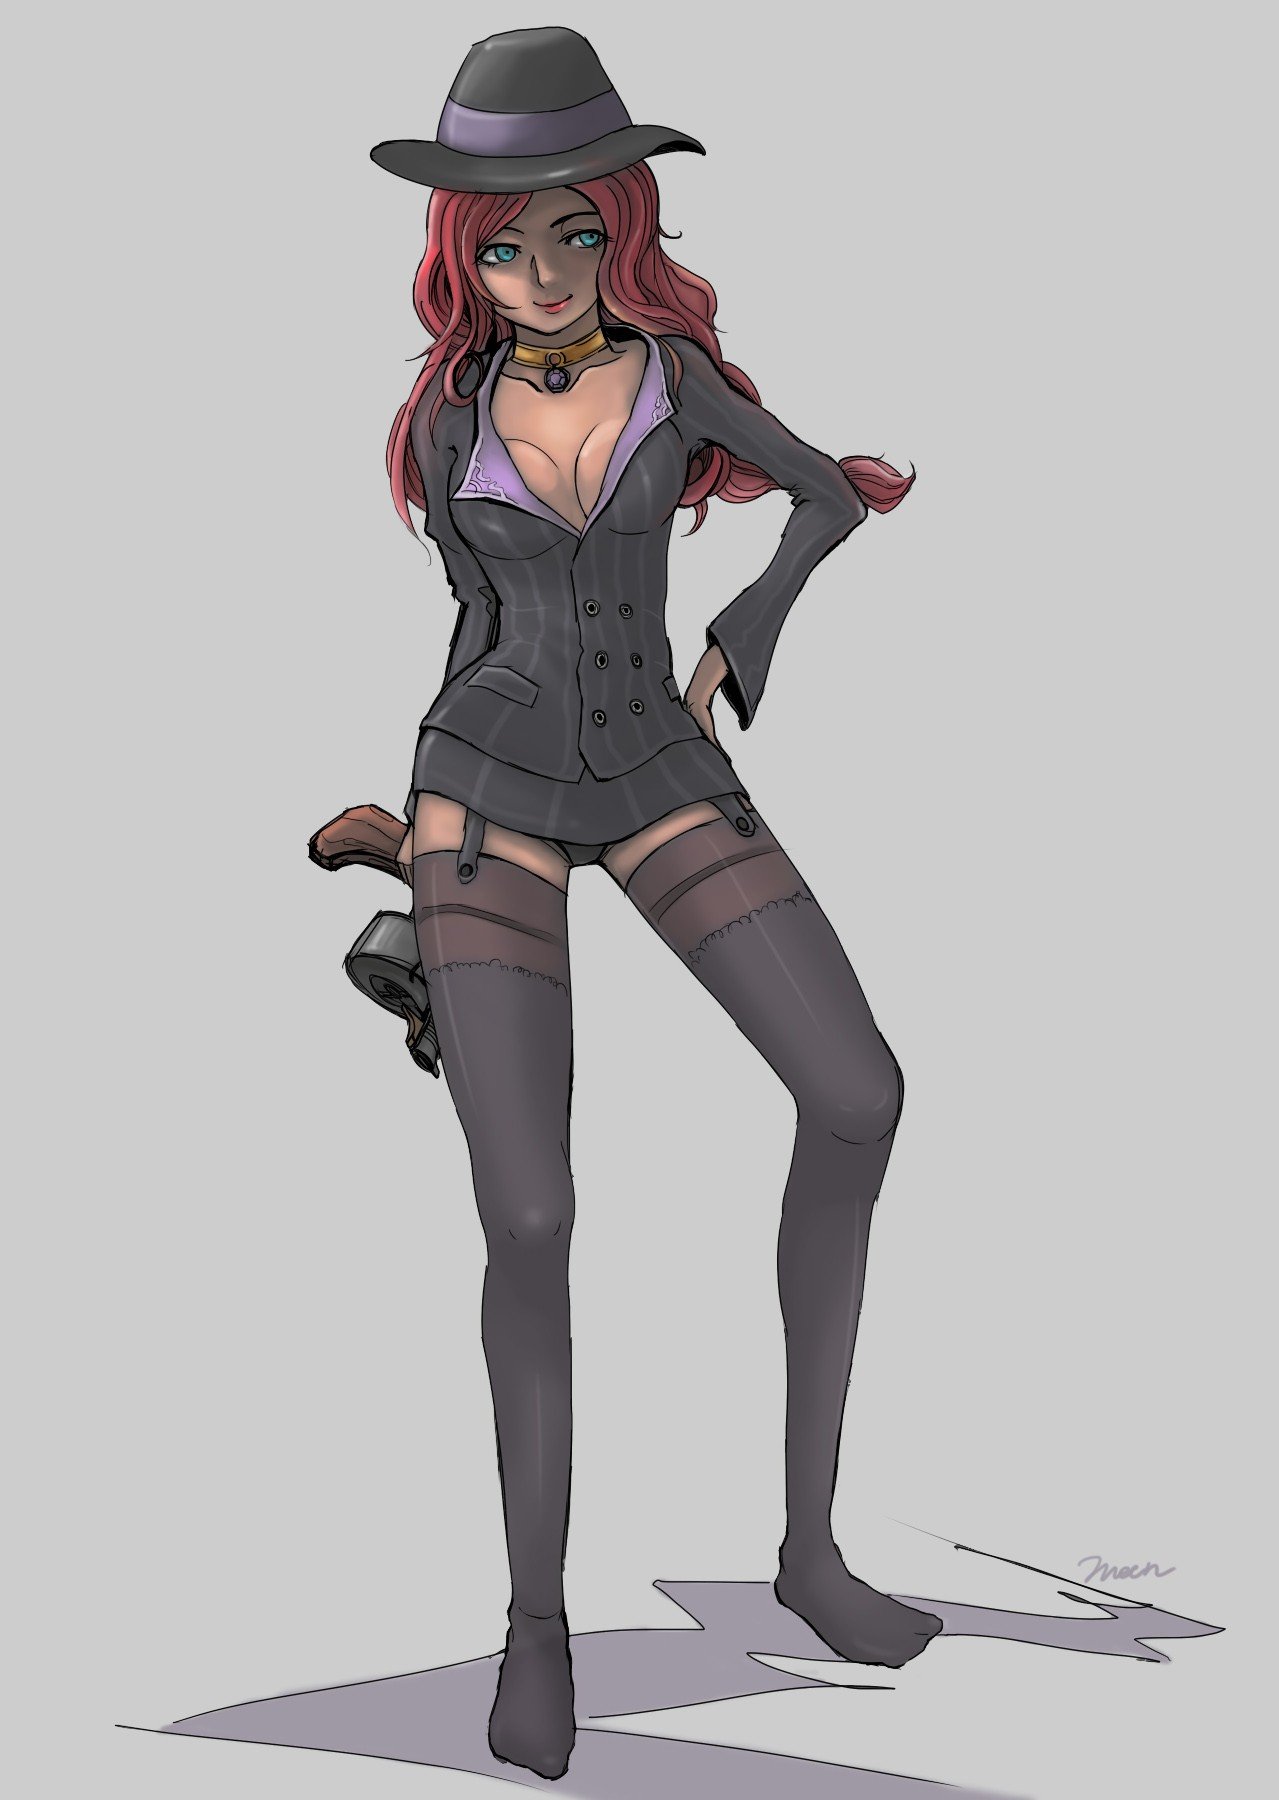 Mafia Miss Fortune Wallpapers And Fan Arts League Of Legends Lol Stats